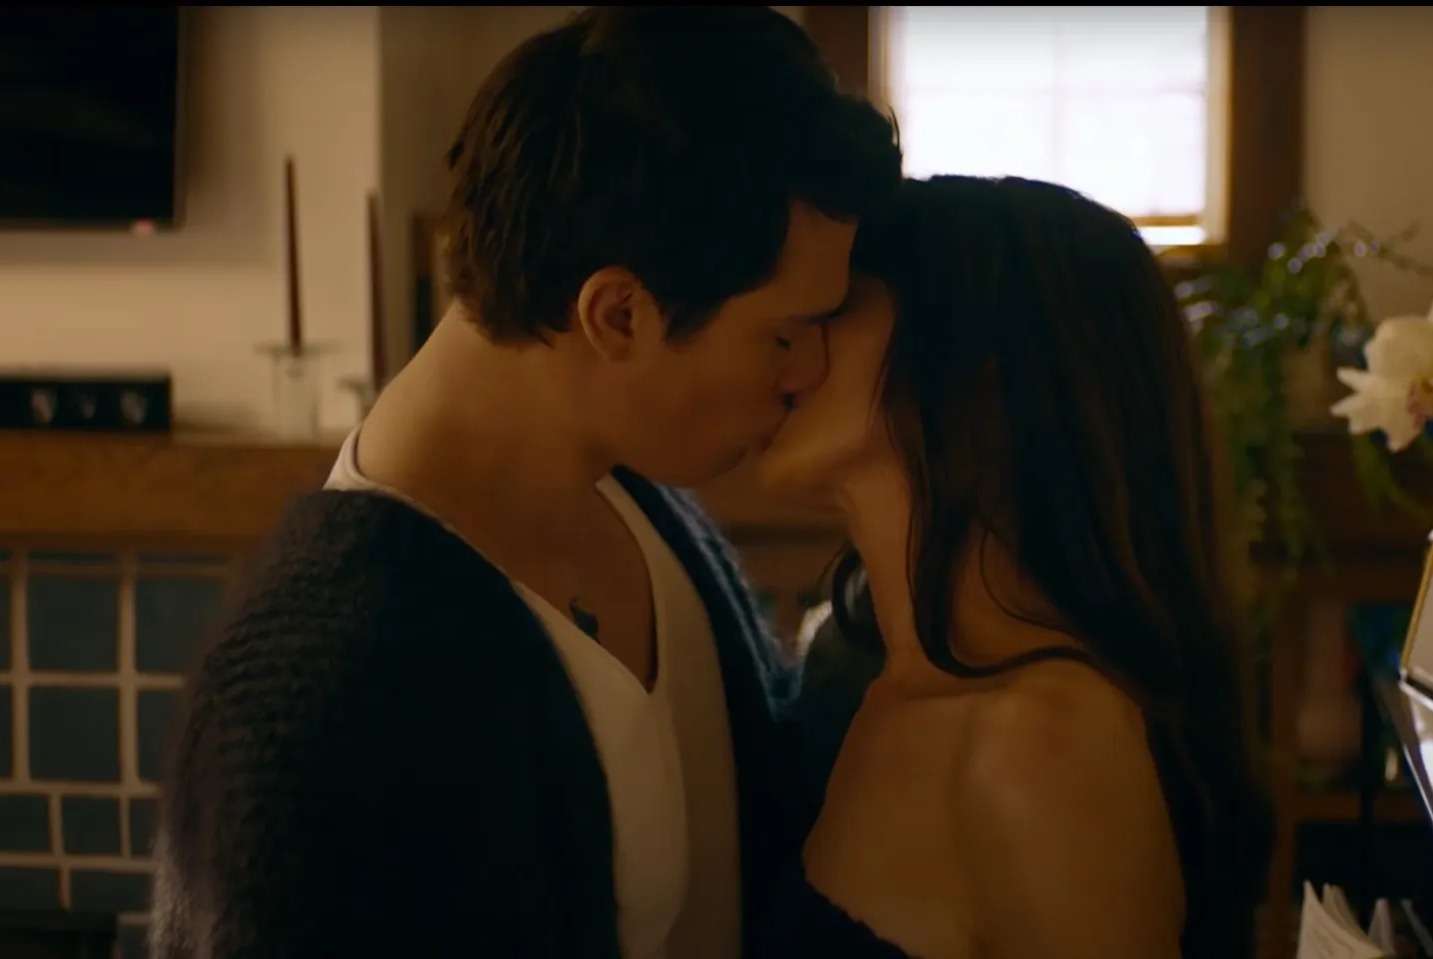 Fans claimed Anne looked 'in her 20s' in the steamy trailer